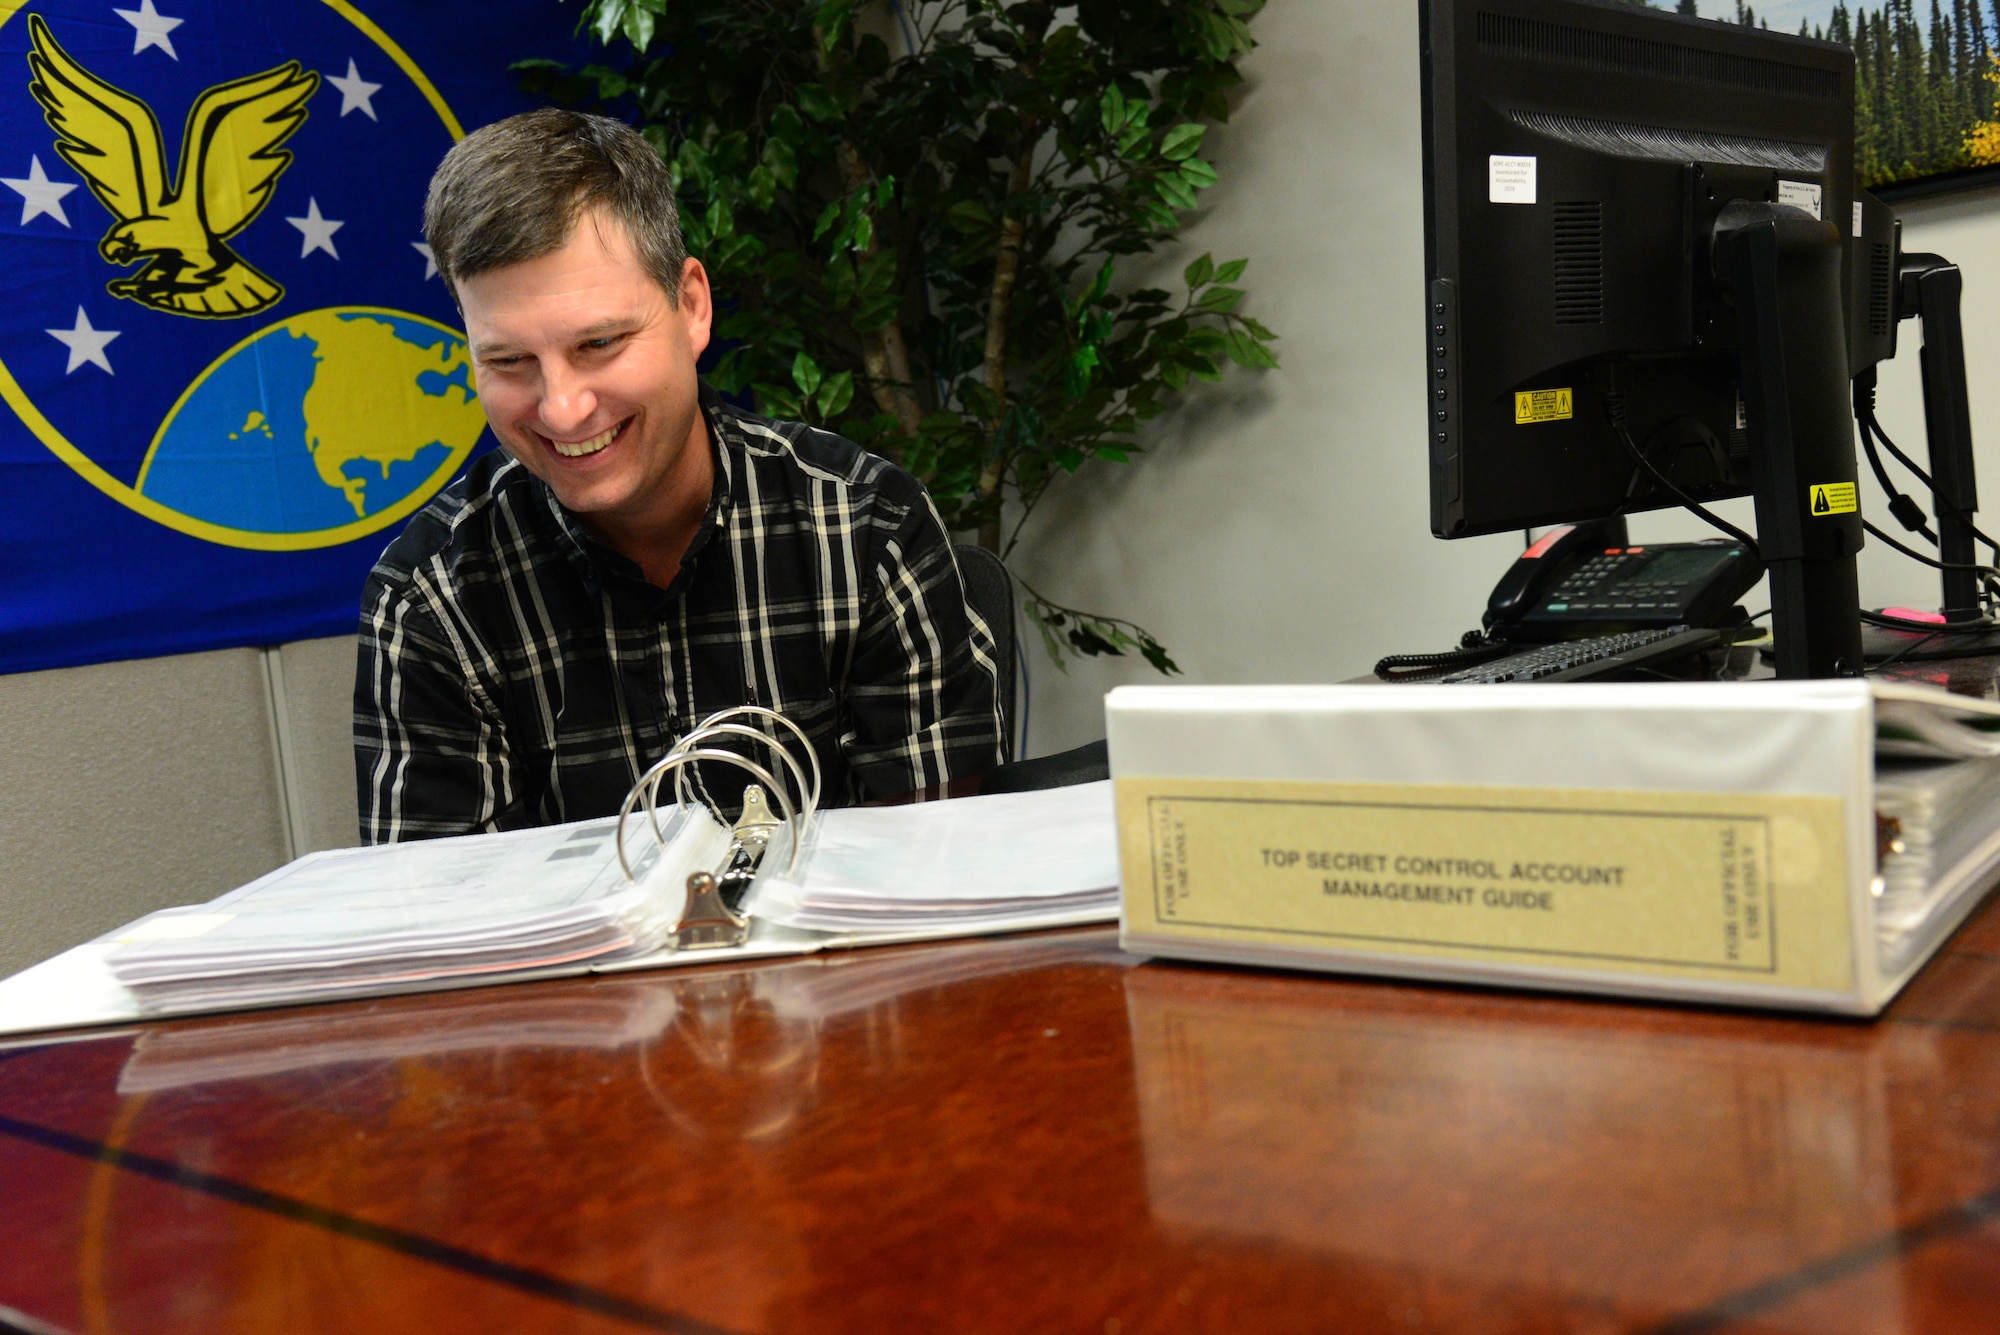 Kevin Younkin, 341st Operations Support Squadron security specialist, references one of his communications security guidance materials Nov. 2, 2016, at Malmstrom Air Force Base, Mont. Younkin works as a communications security manager responsible for several tasks which include maintaining accountability of classified materials and administering training to missileers on the proper handling of sensitive documents and information. (U.S. Air Force photo/Airman 1st Class Magen M. Reeves)